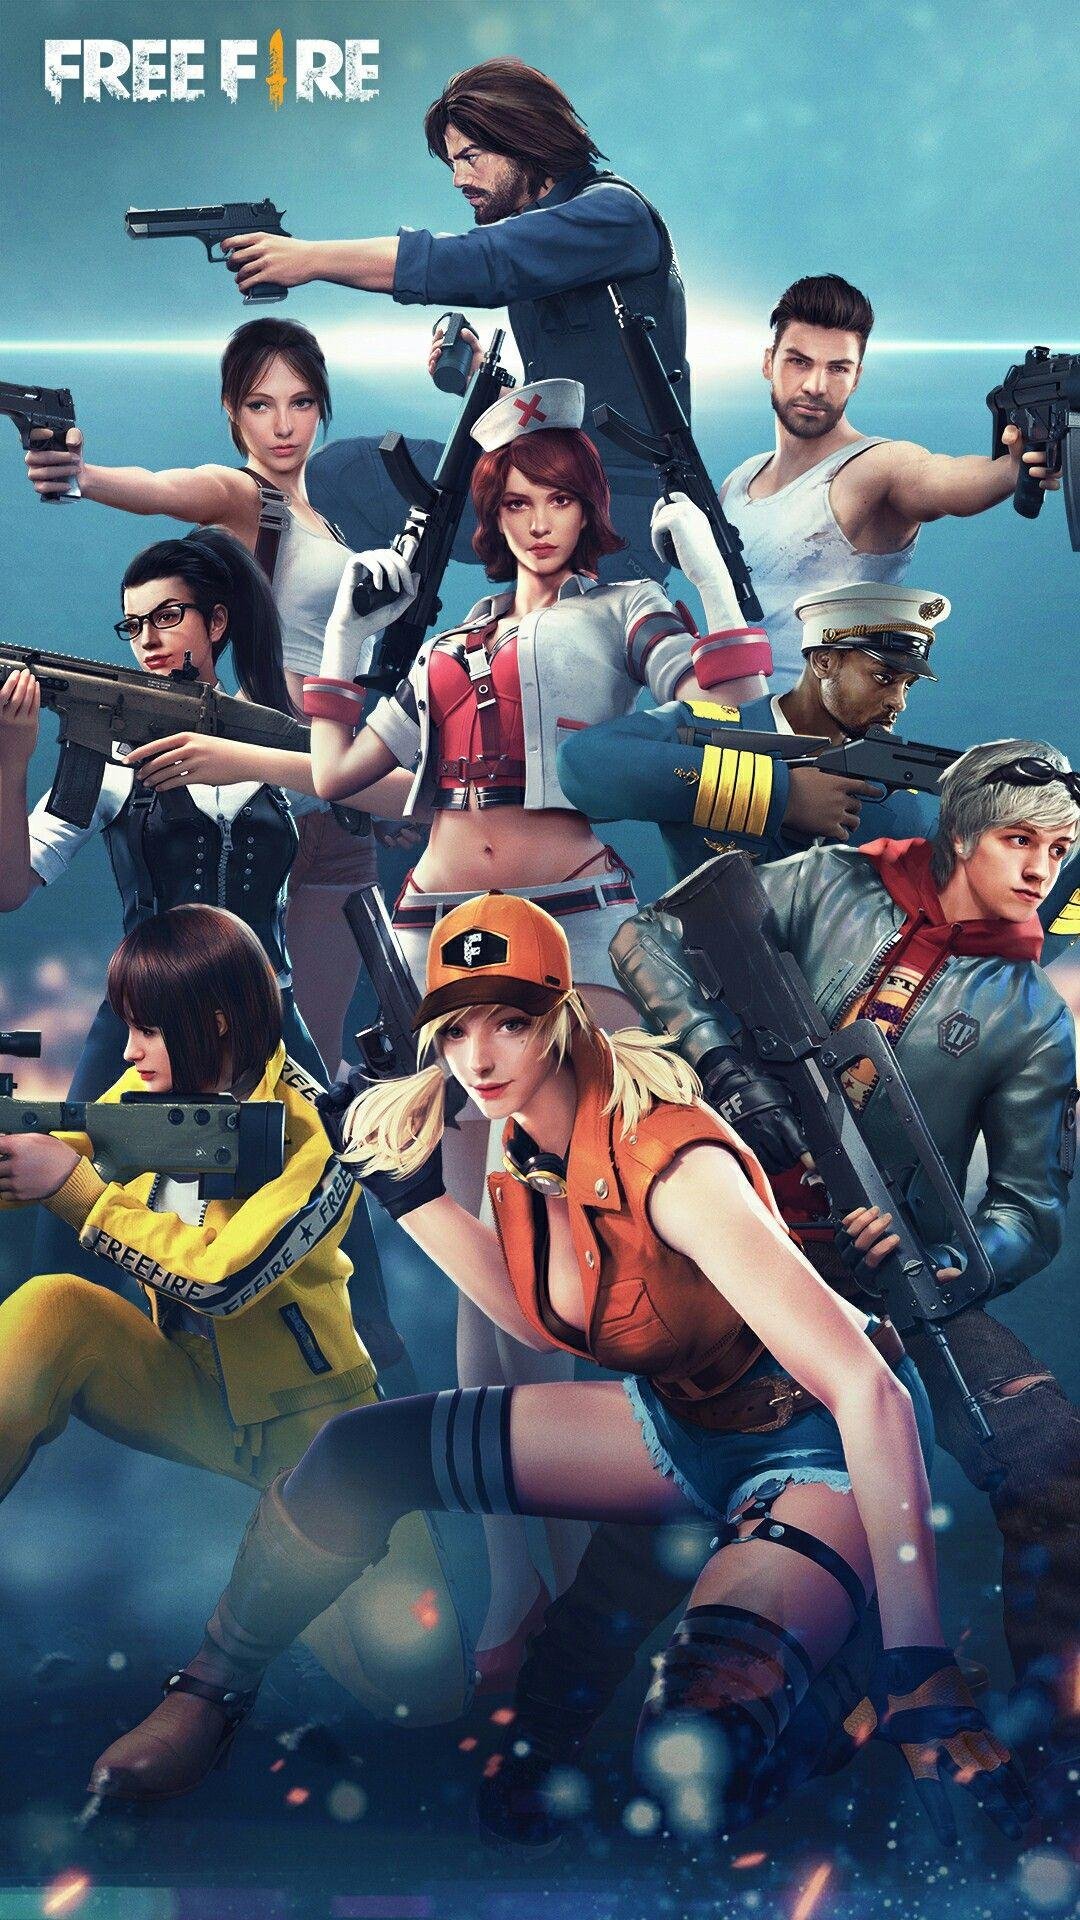 Garena Free Fire characters